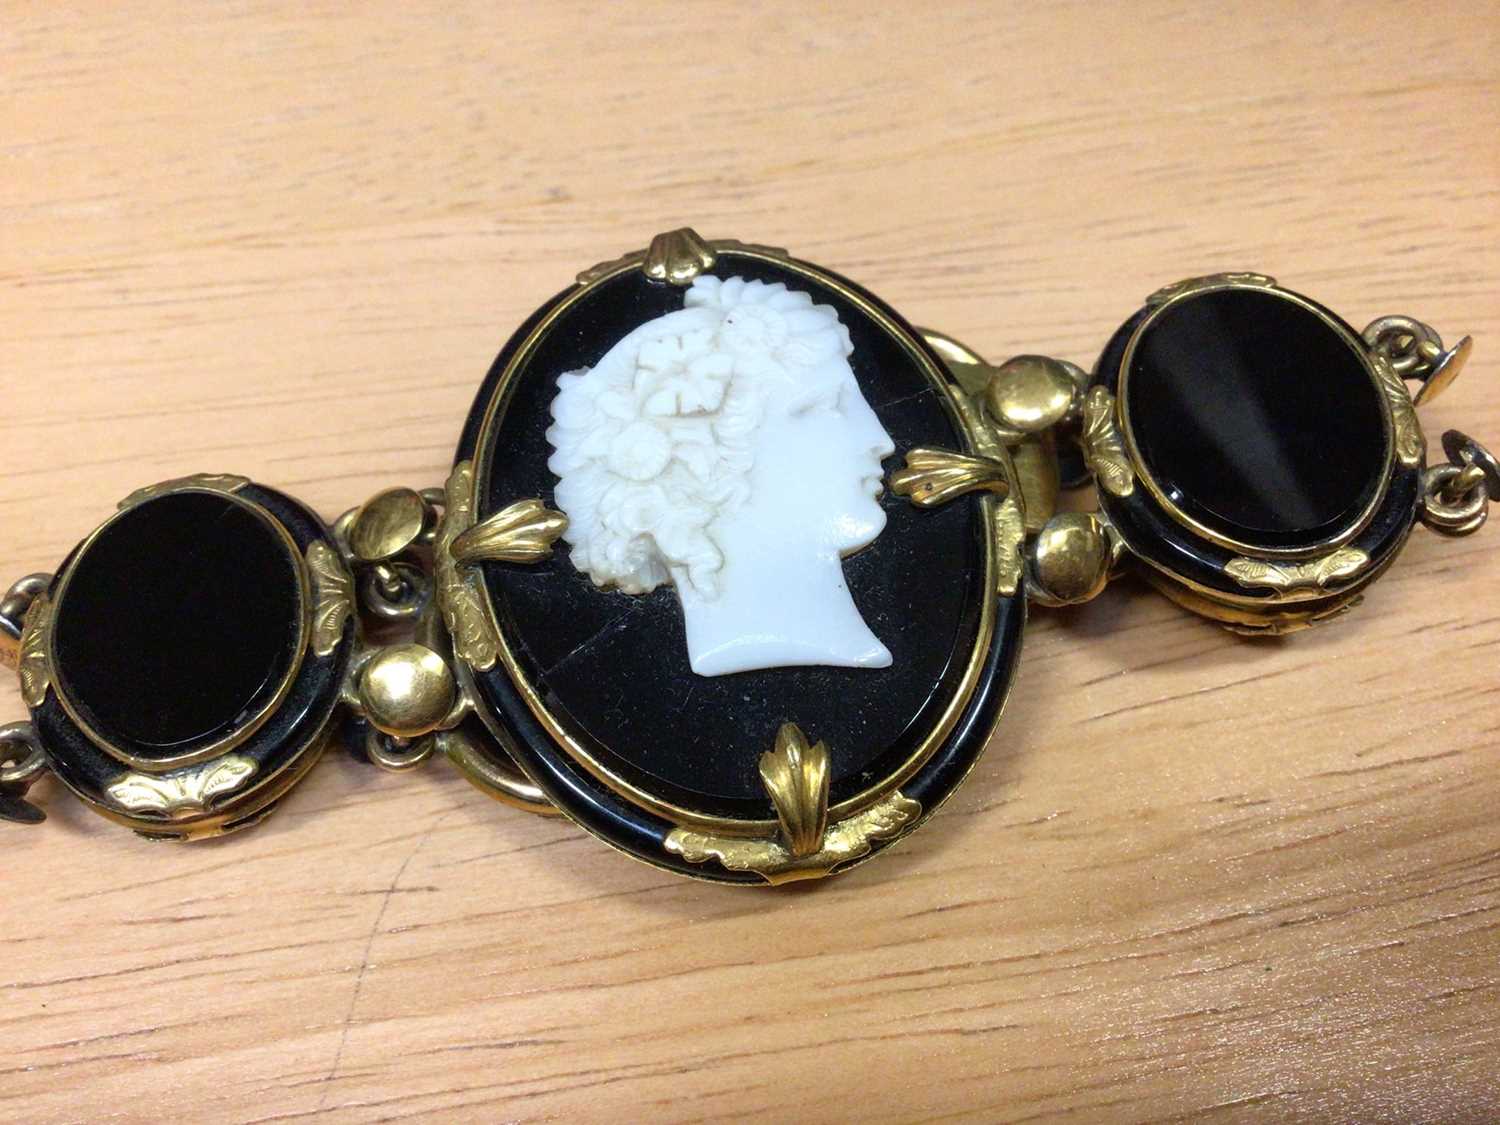 Victorian black glass cameo bracelet in yellow metal setting together with a black onyx and silver b - Image 5 of 5